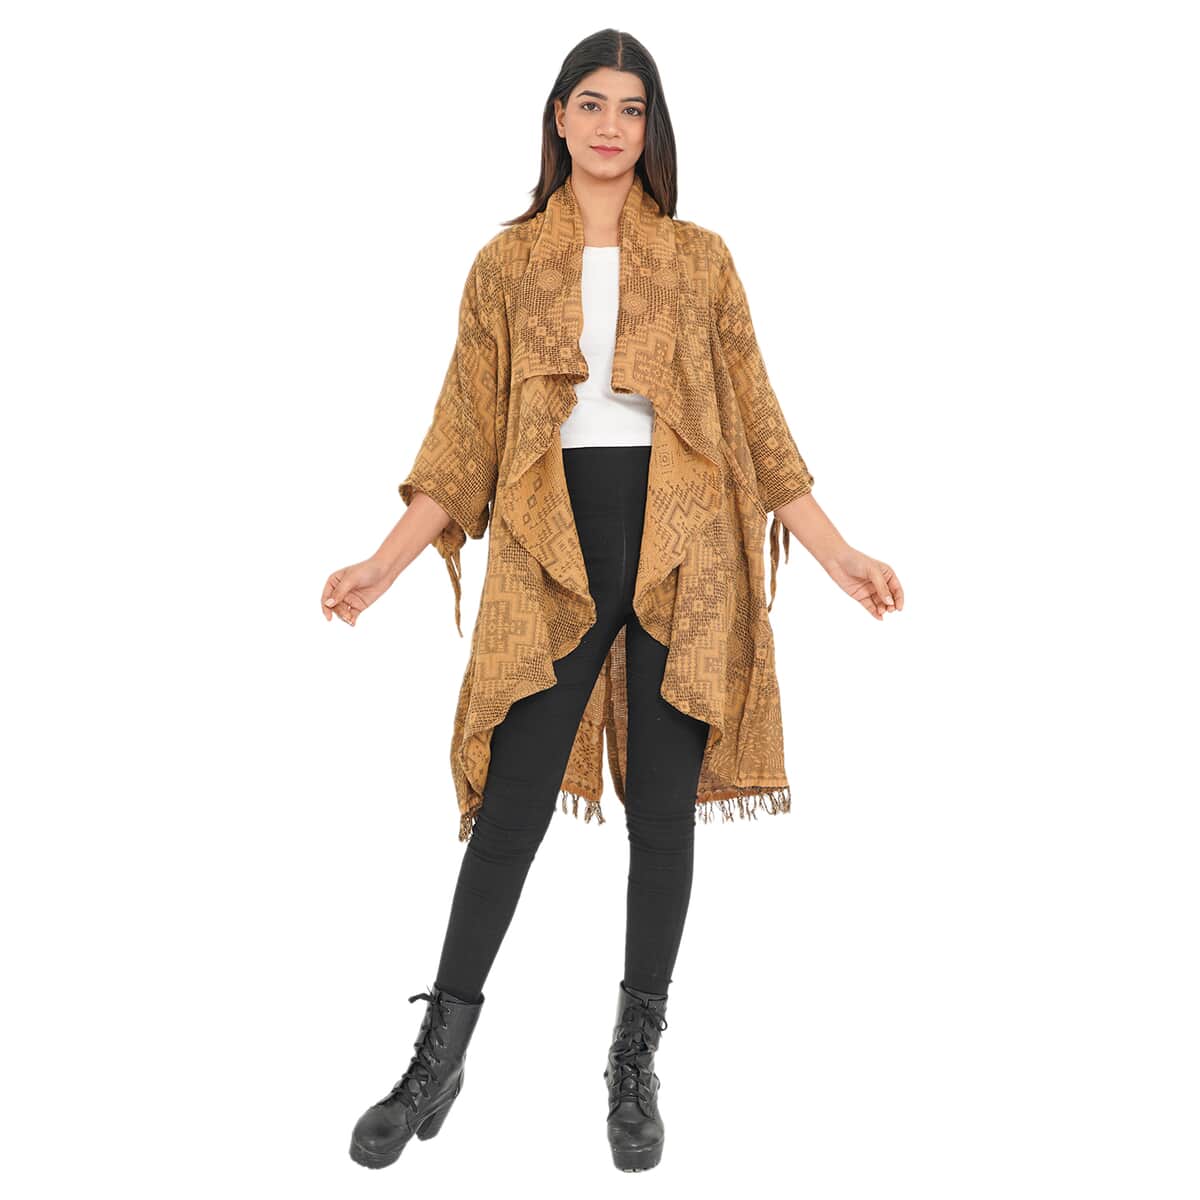 TAMSY Gold 100% Cotton Double Layer Jacquard Waterfall Front Cardigan - One Size Missy (35"x24") image number 0